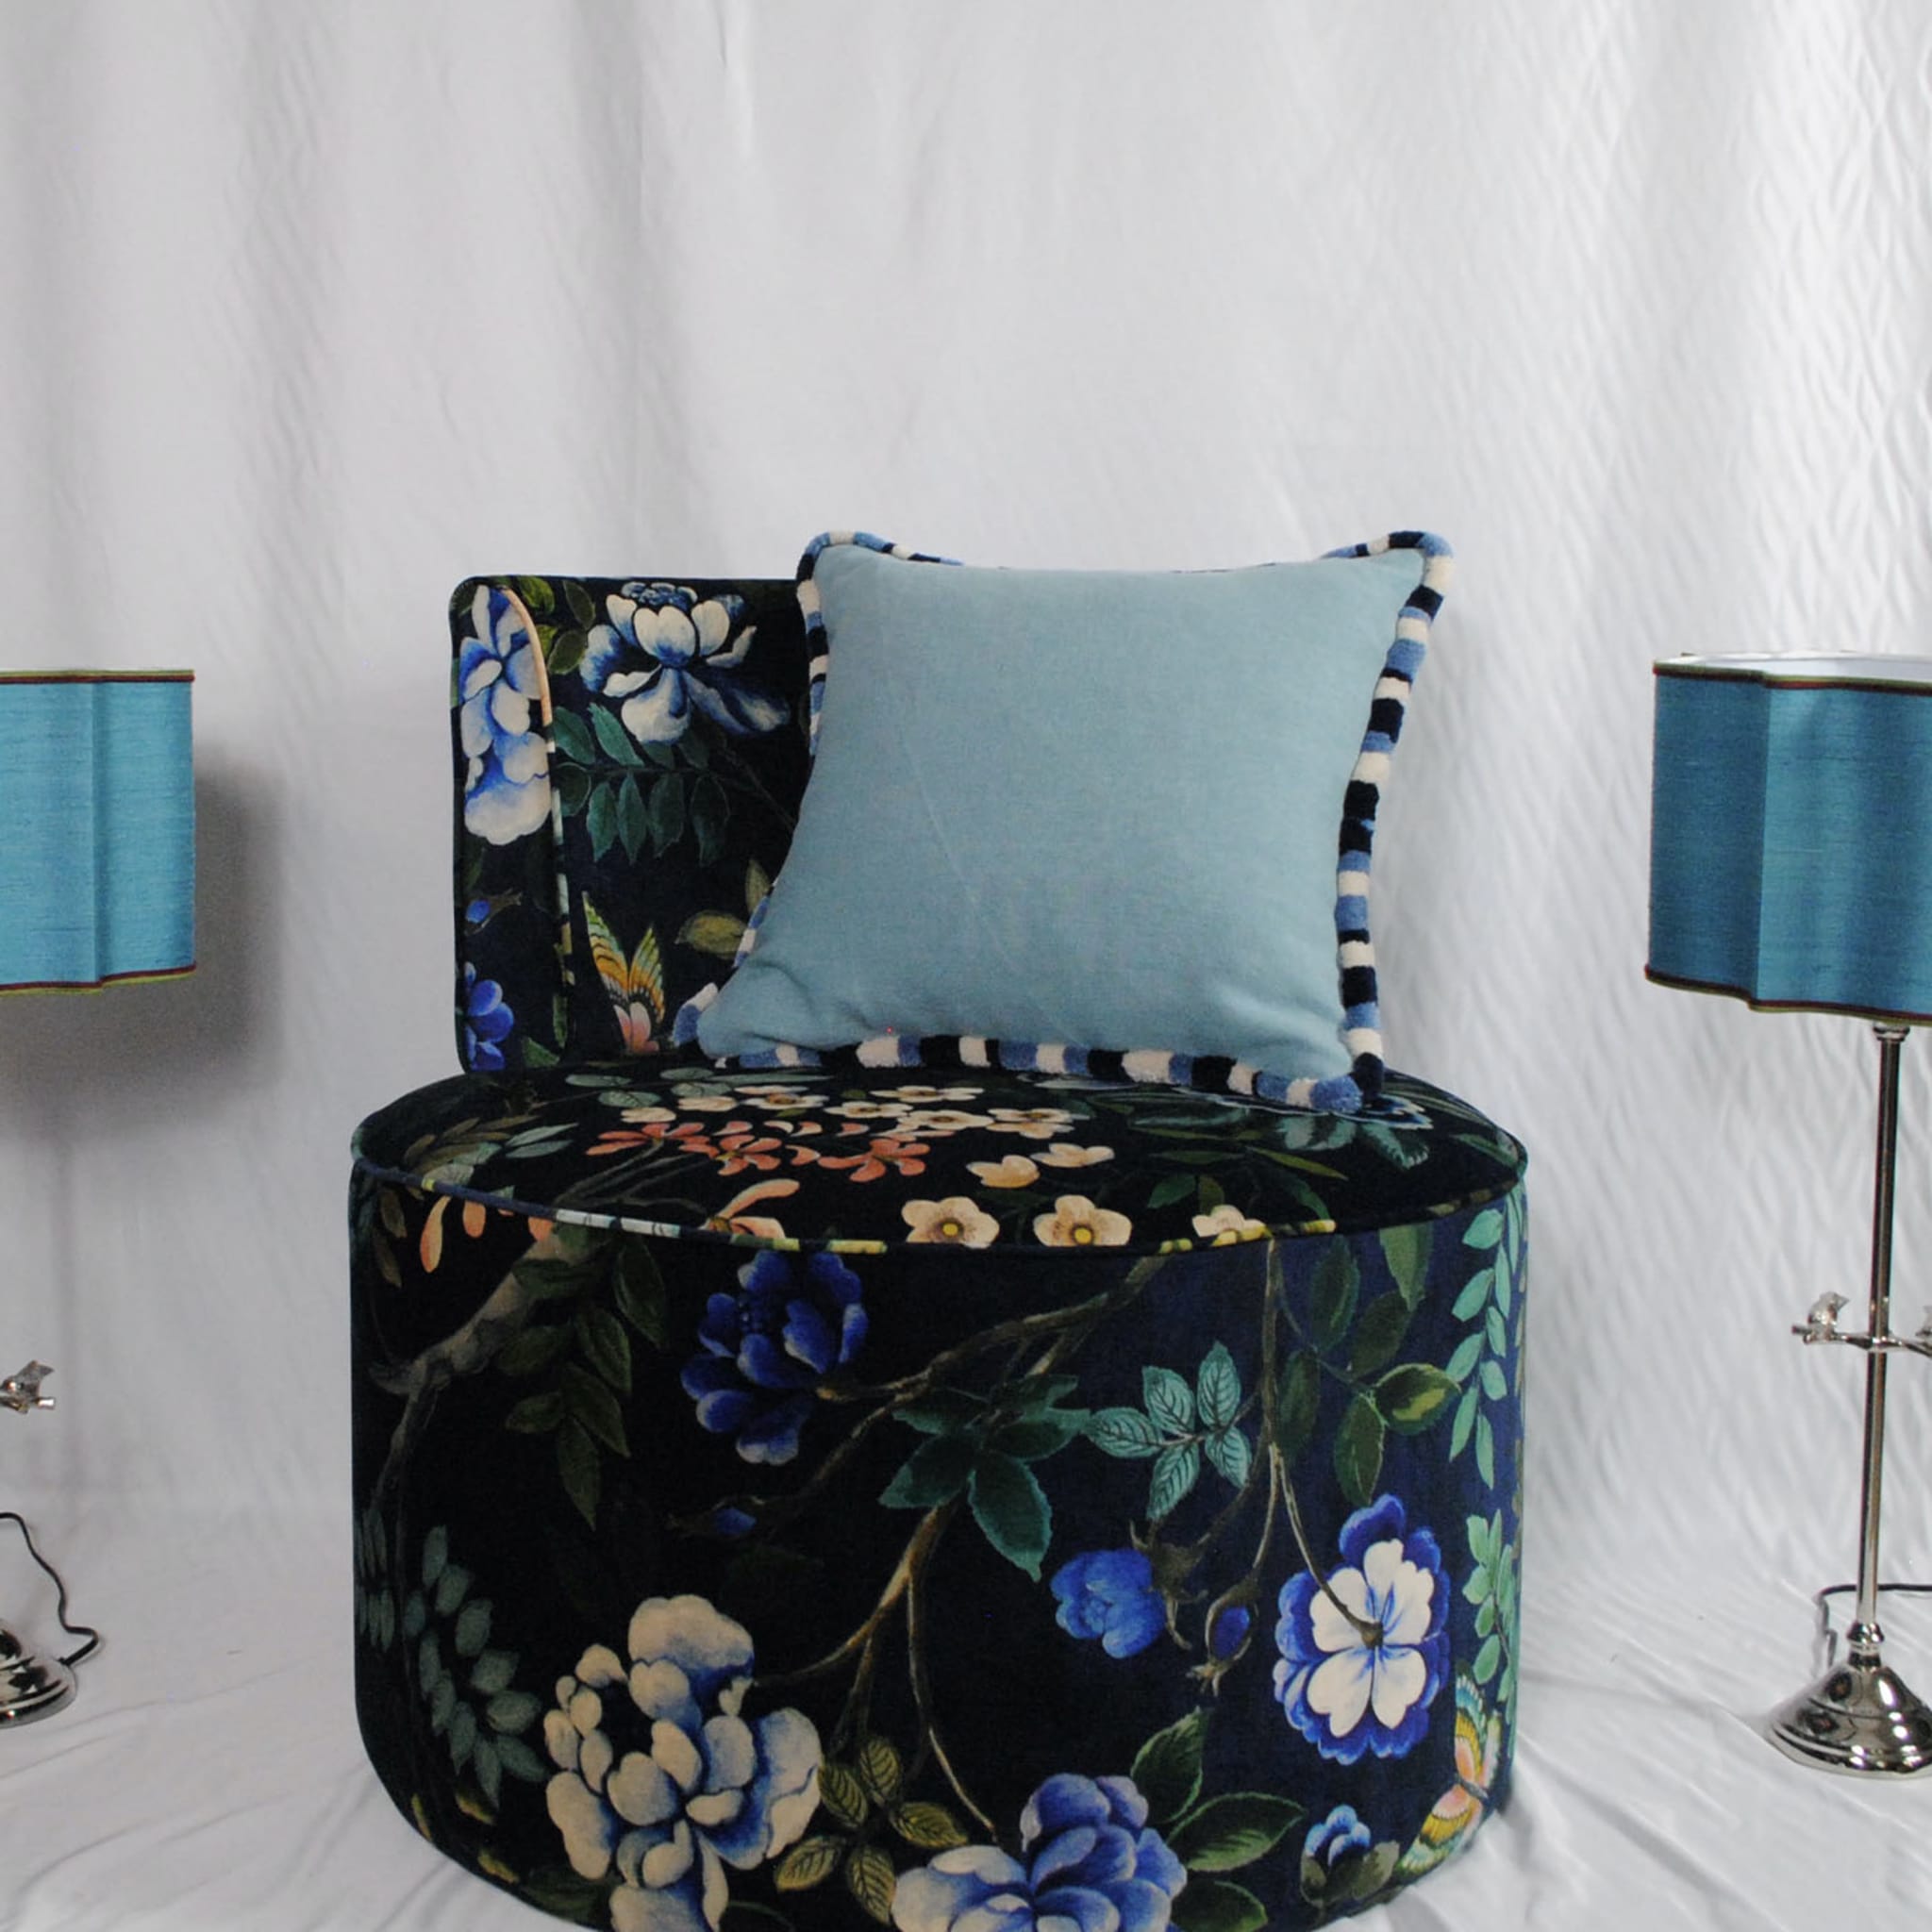 Round Flowers Floral Polychrome Chair - Alternative view 3